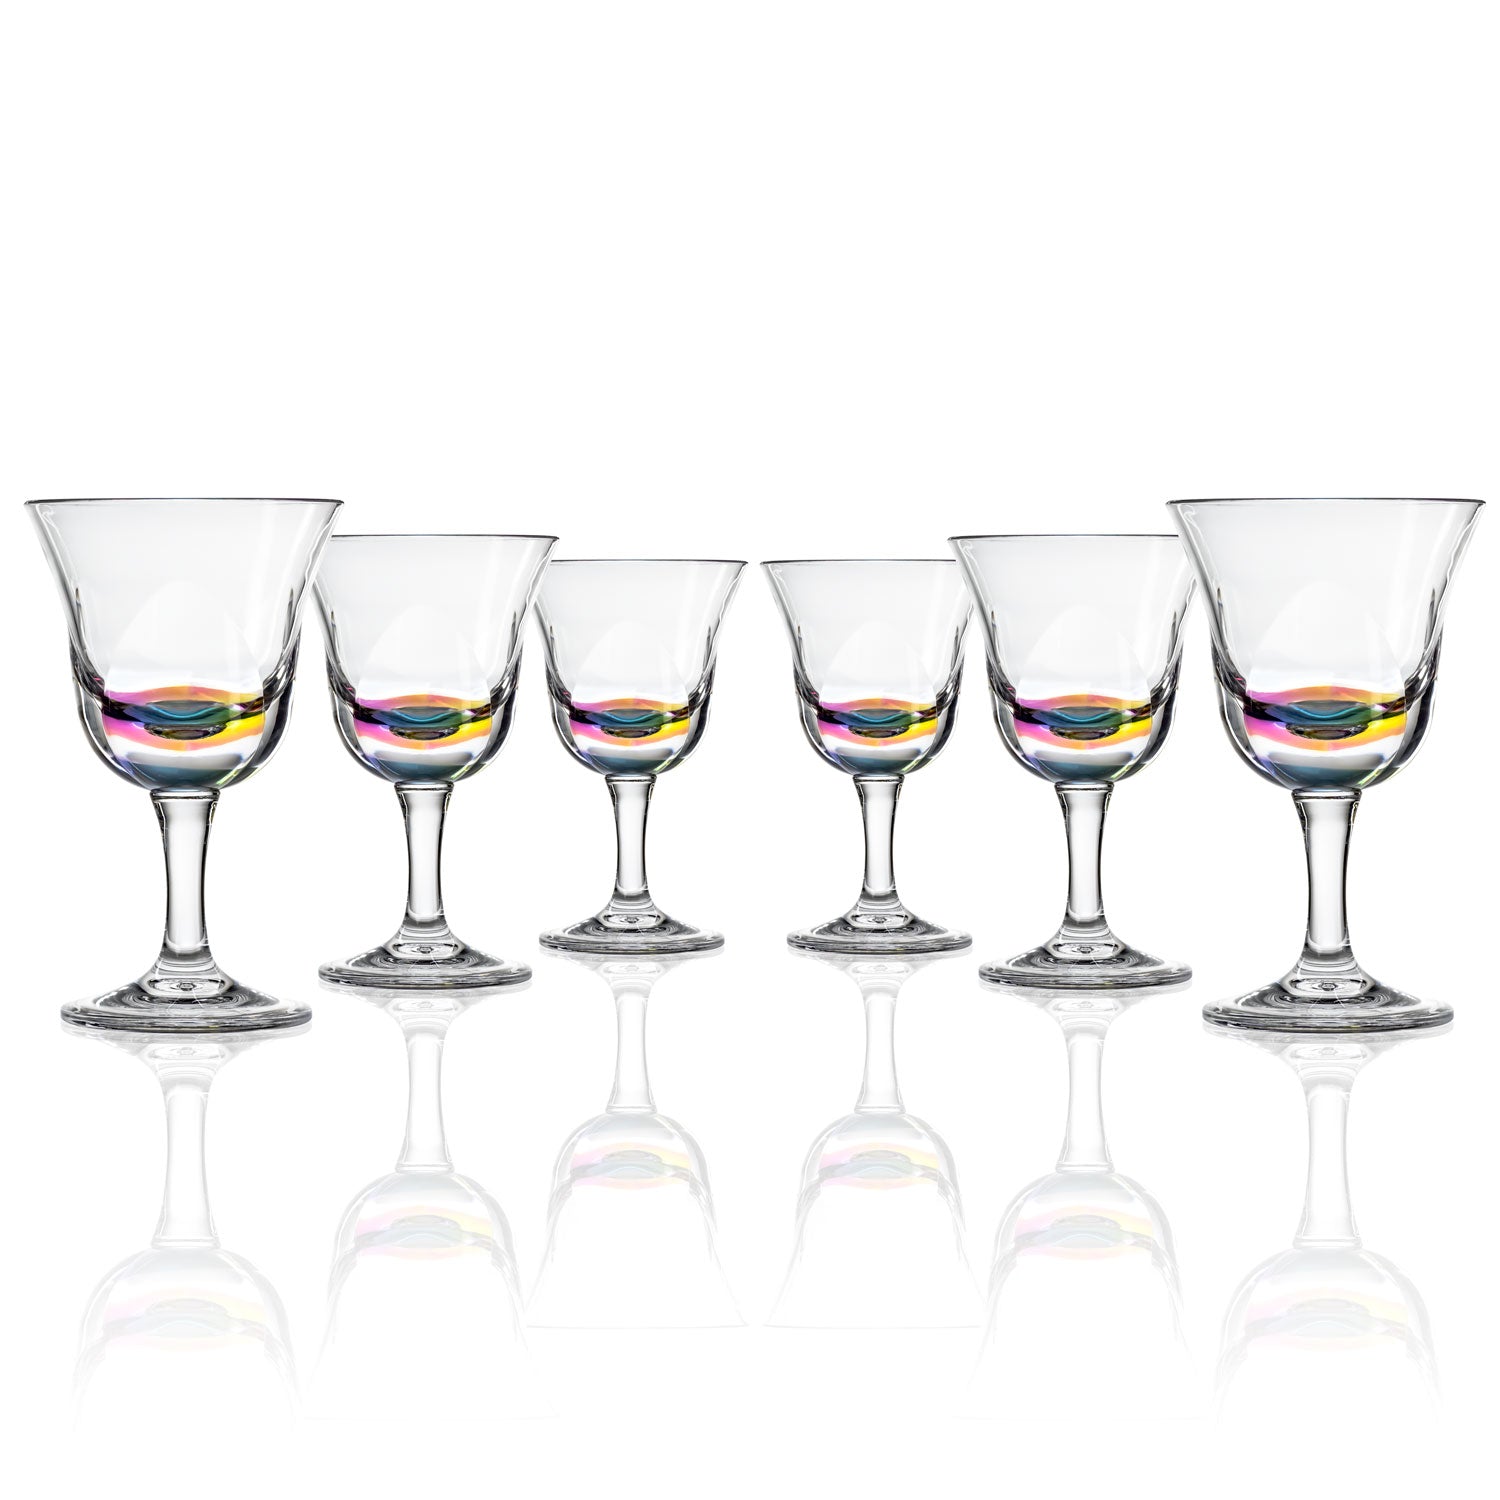 Set of 6, 10-ounce rainbow acrylic wine glasses in the Fiori collection by Merritt Designs. Front view on white background